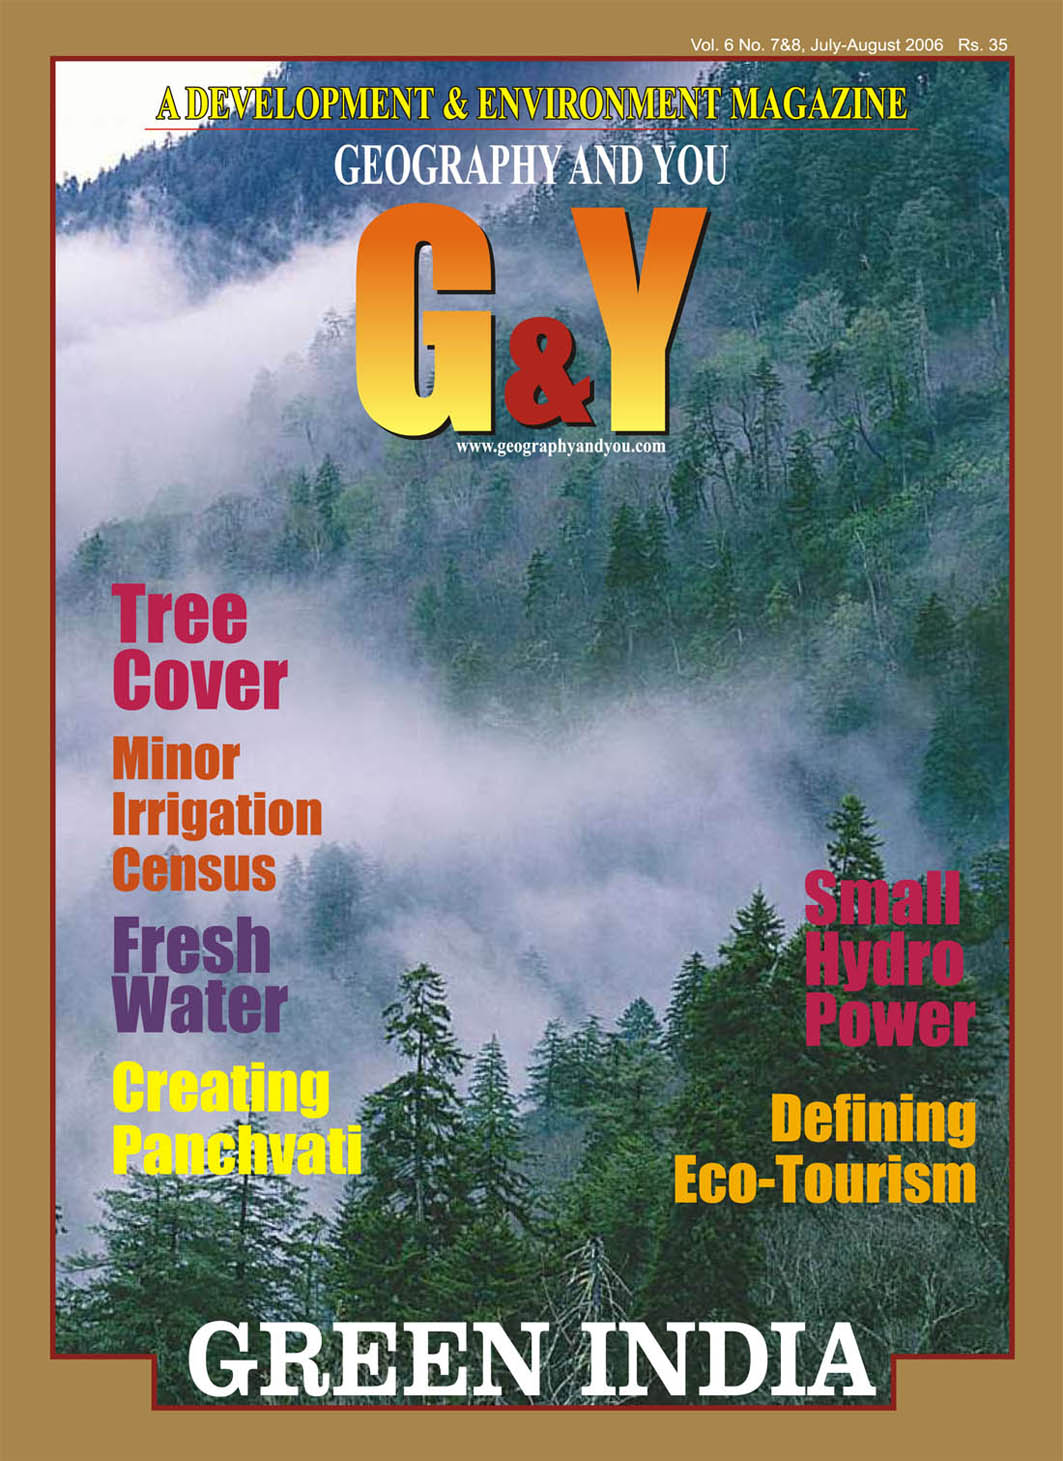 Green India (July-August 2006) cover